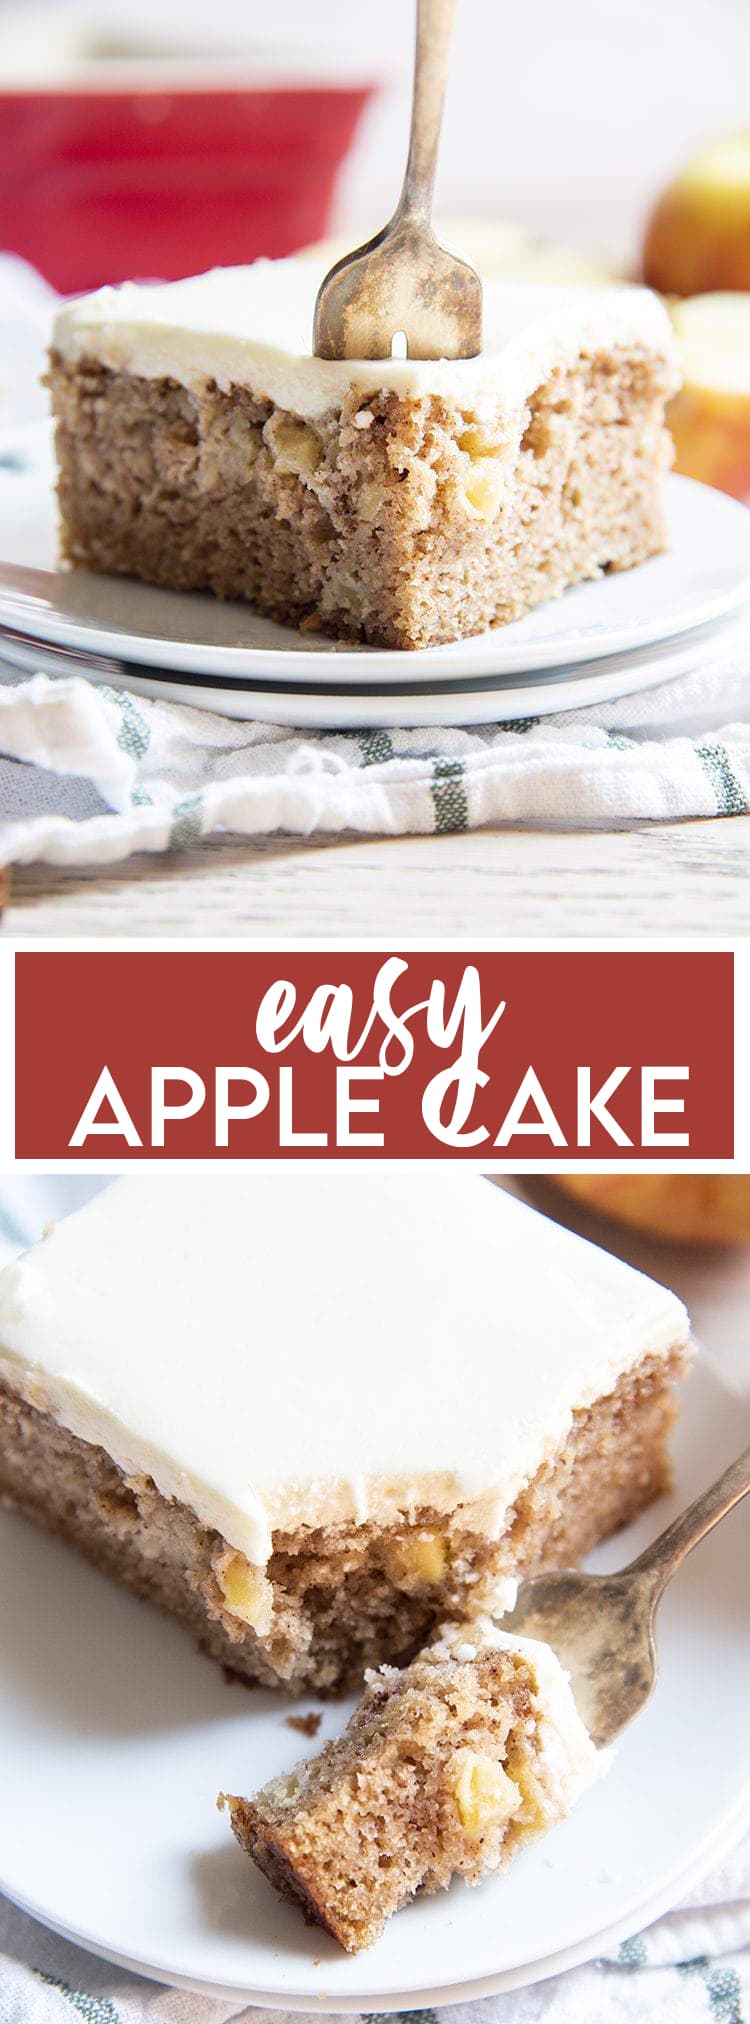 Twp photos of apple cake on a white plate with text overlay for pinterest.